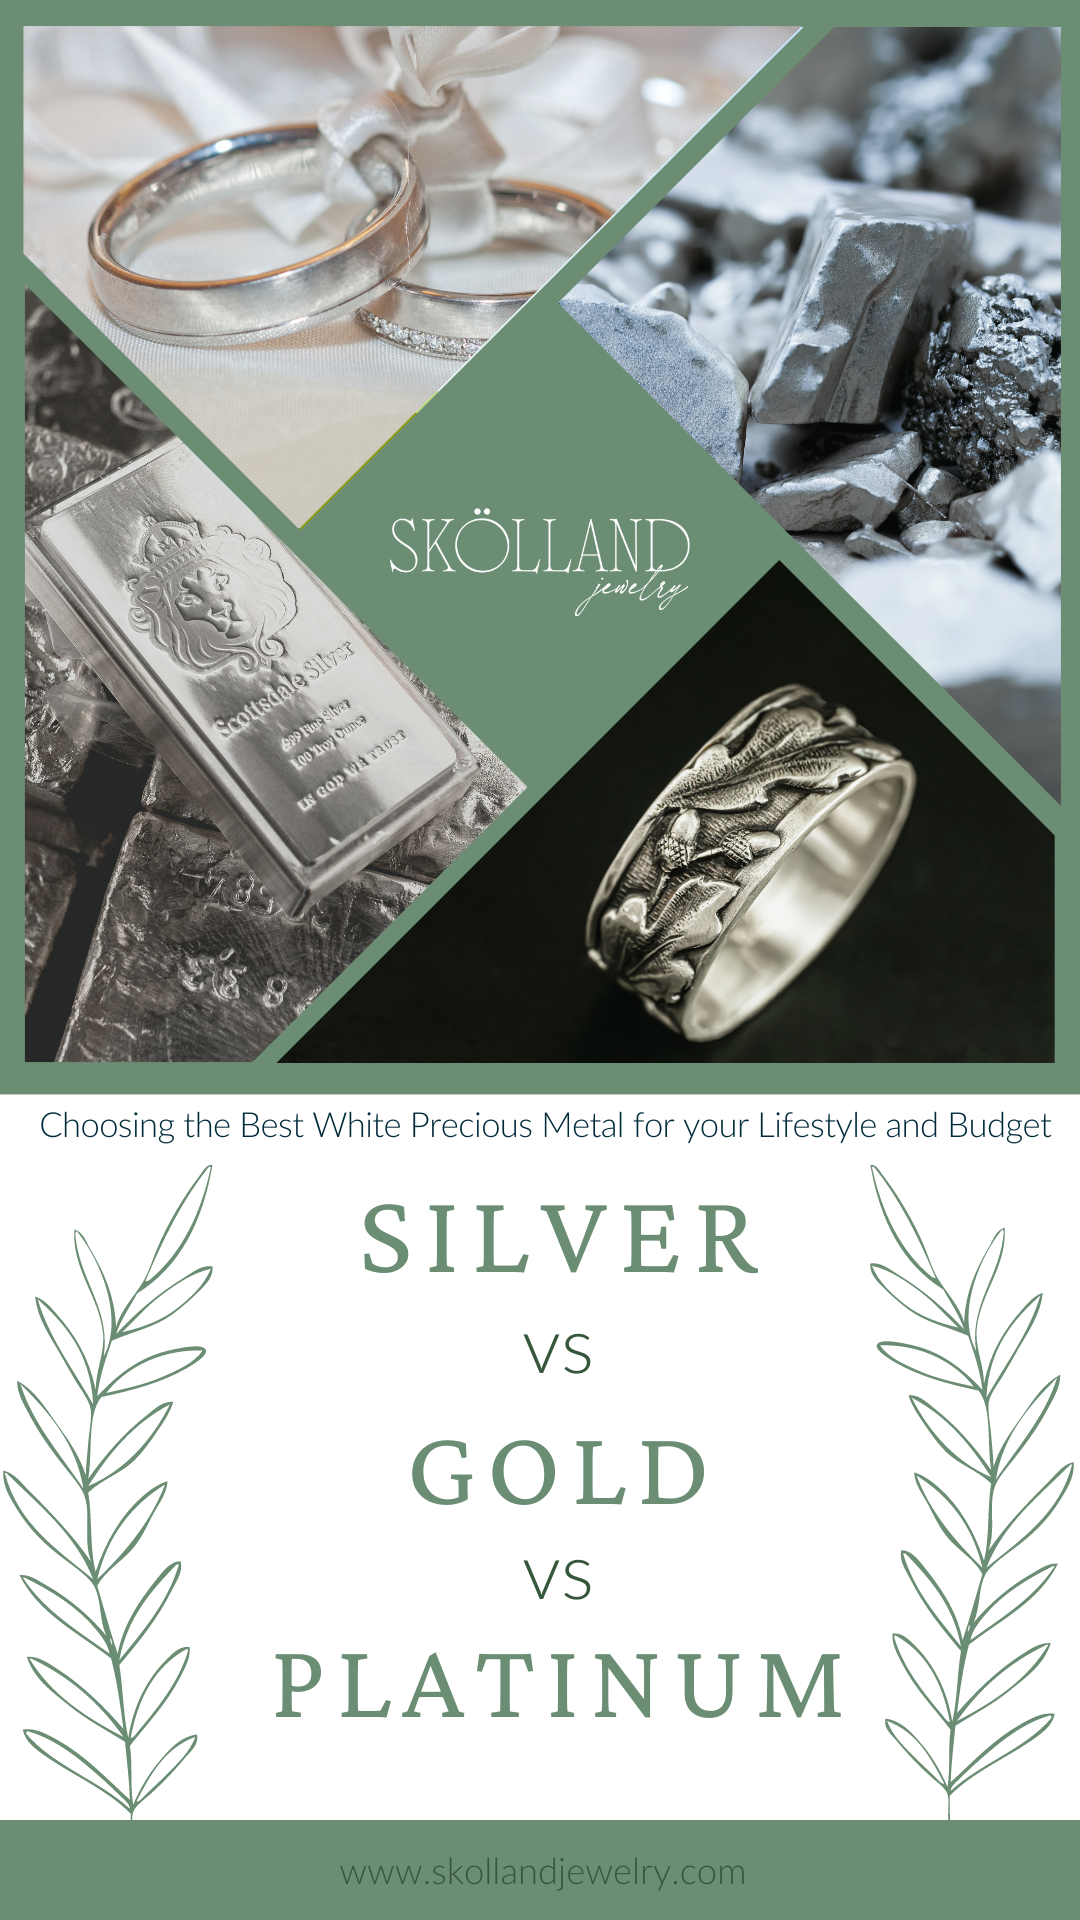 Silver, White Gold, or Platinum: Choosing the Right White Metal for Your Lifestyle and Budget